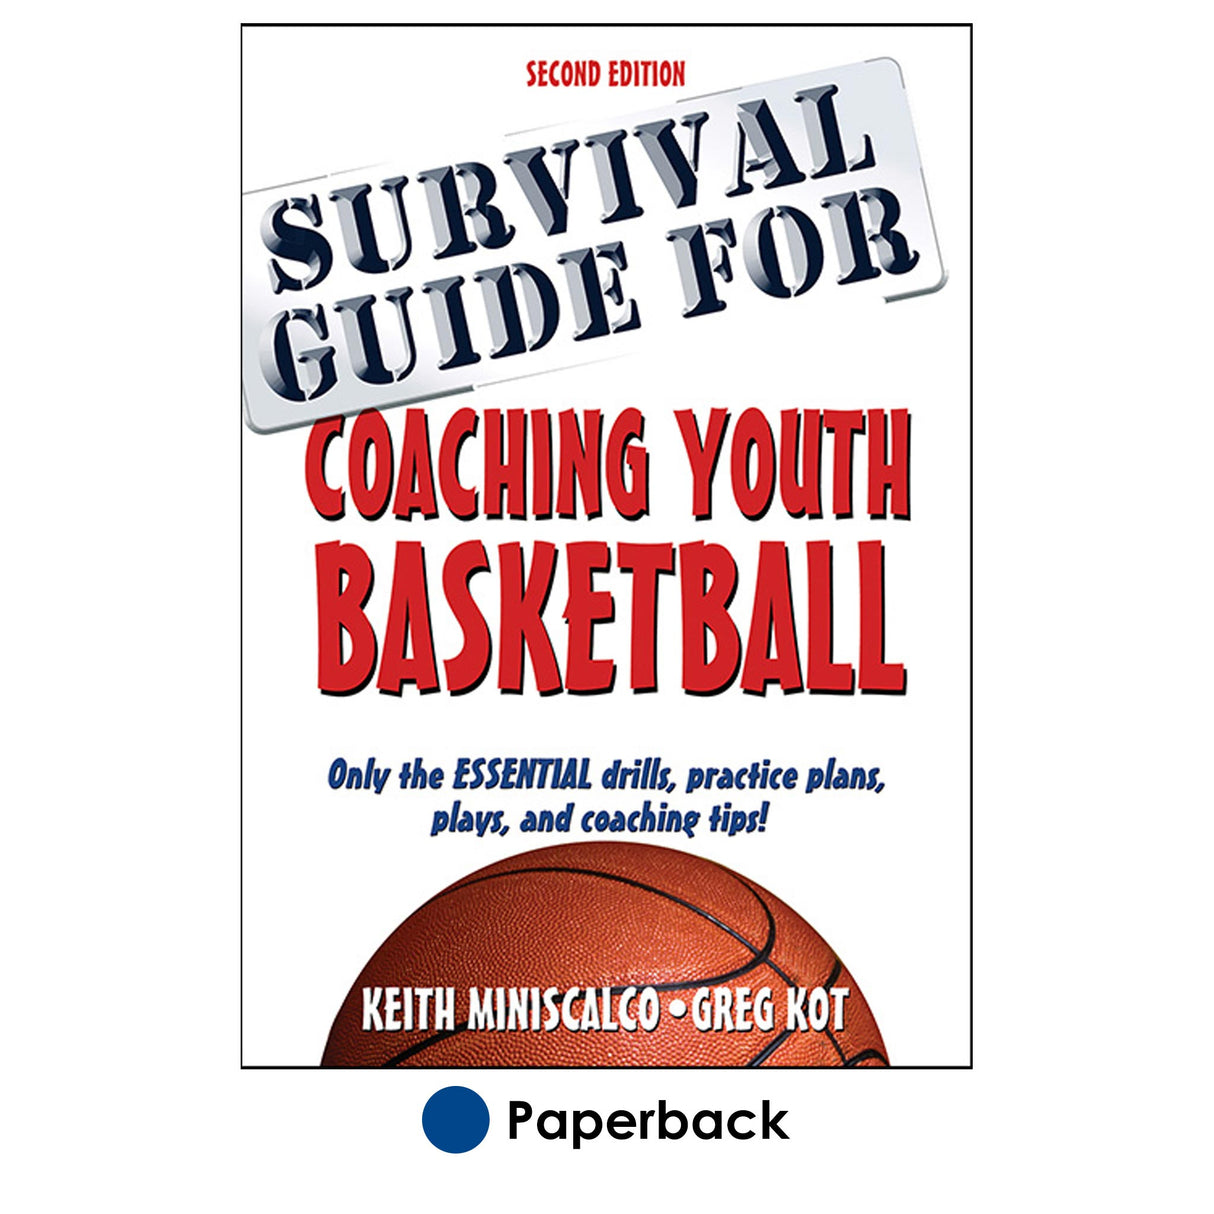 Survival Guide for Coaching Youth Basketball 2nd Edition